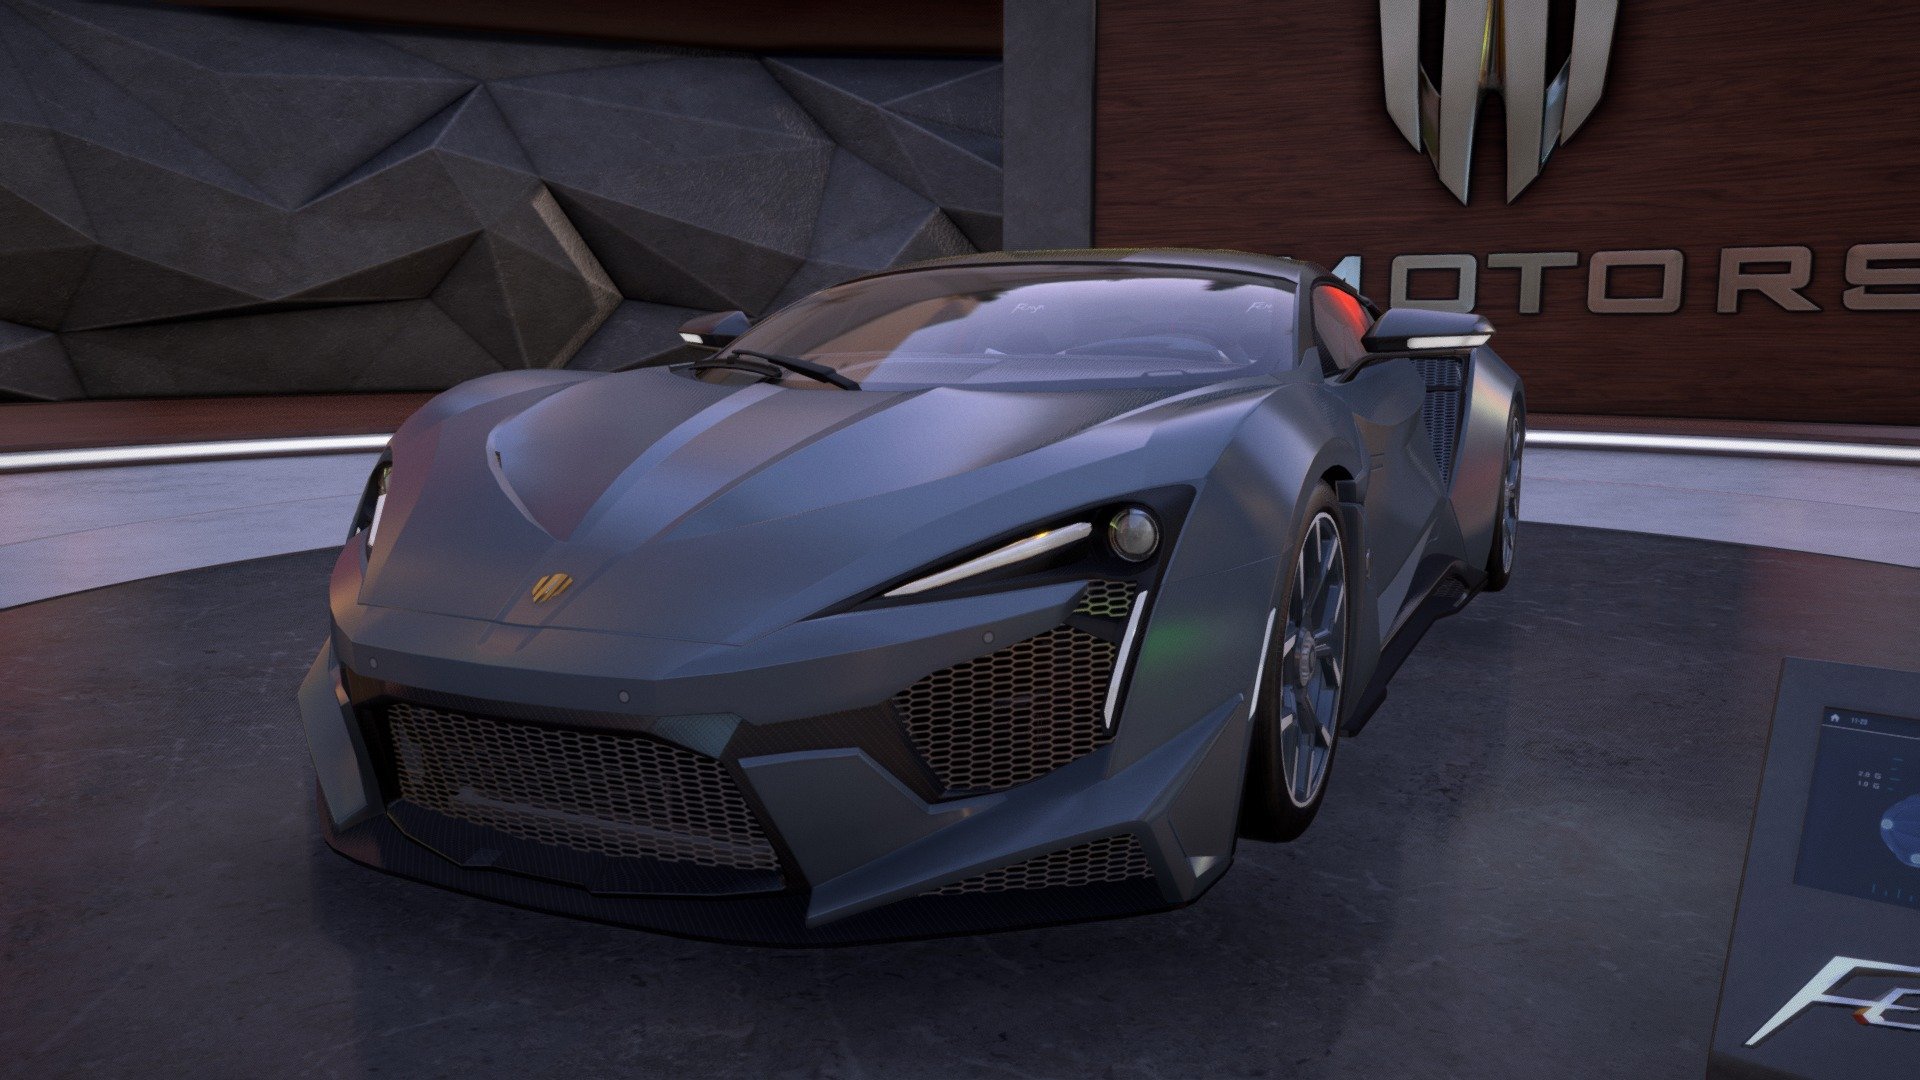 Hi Everyone ! This Fenyr car from WMotors was a model made for a video game on PC / consols platforms for Kylotonn. This was quite fun to make on severals LODS levels with interior 3d model